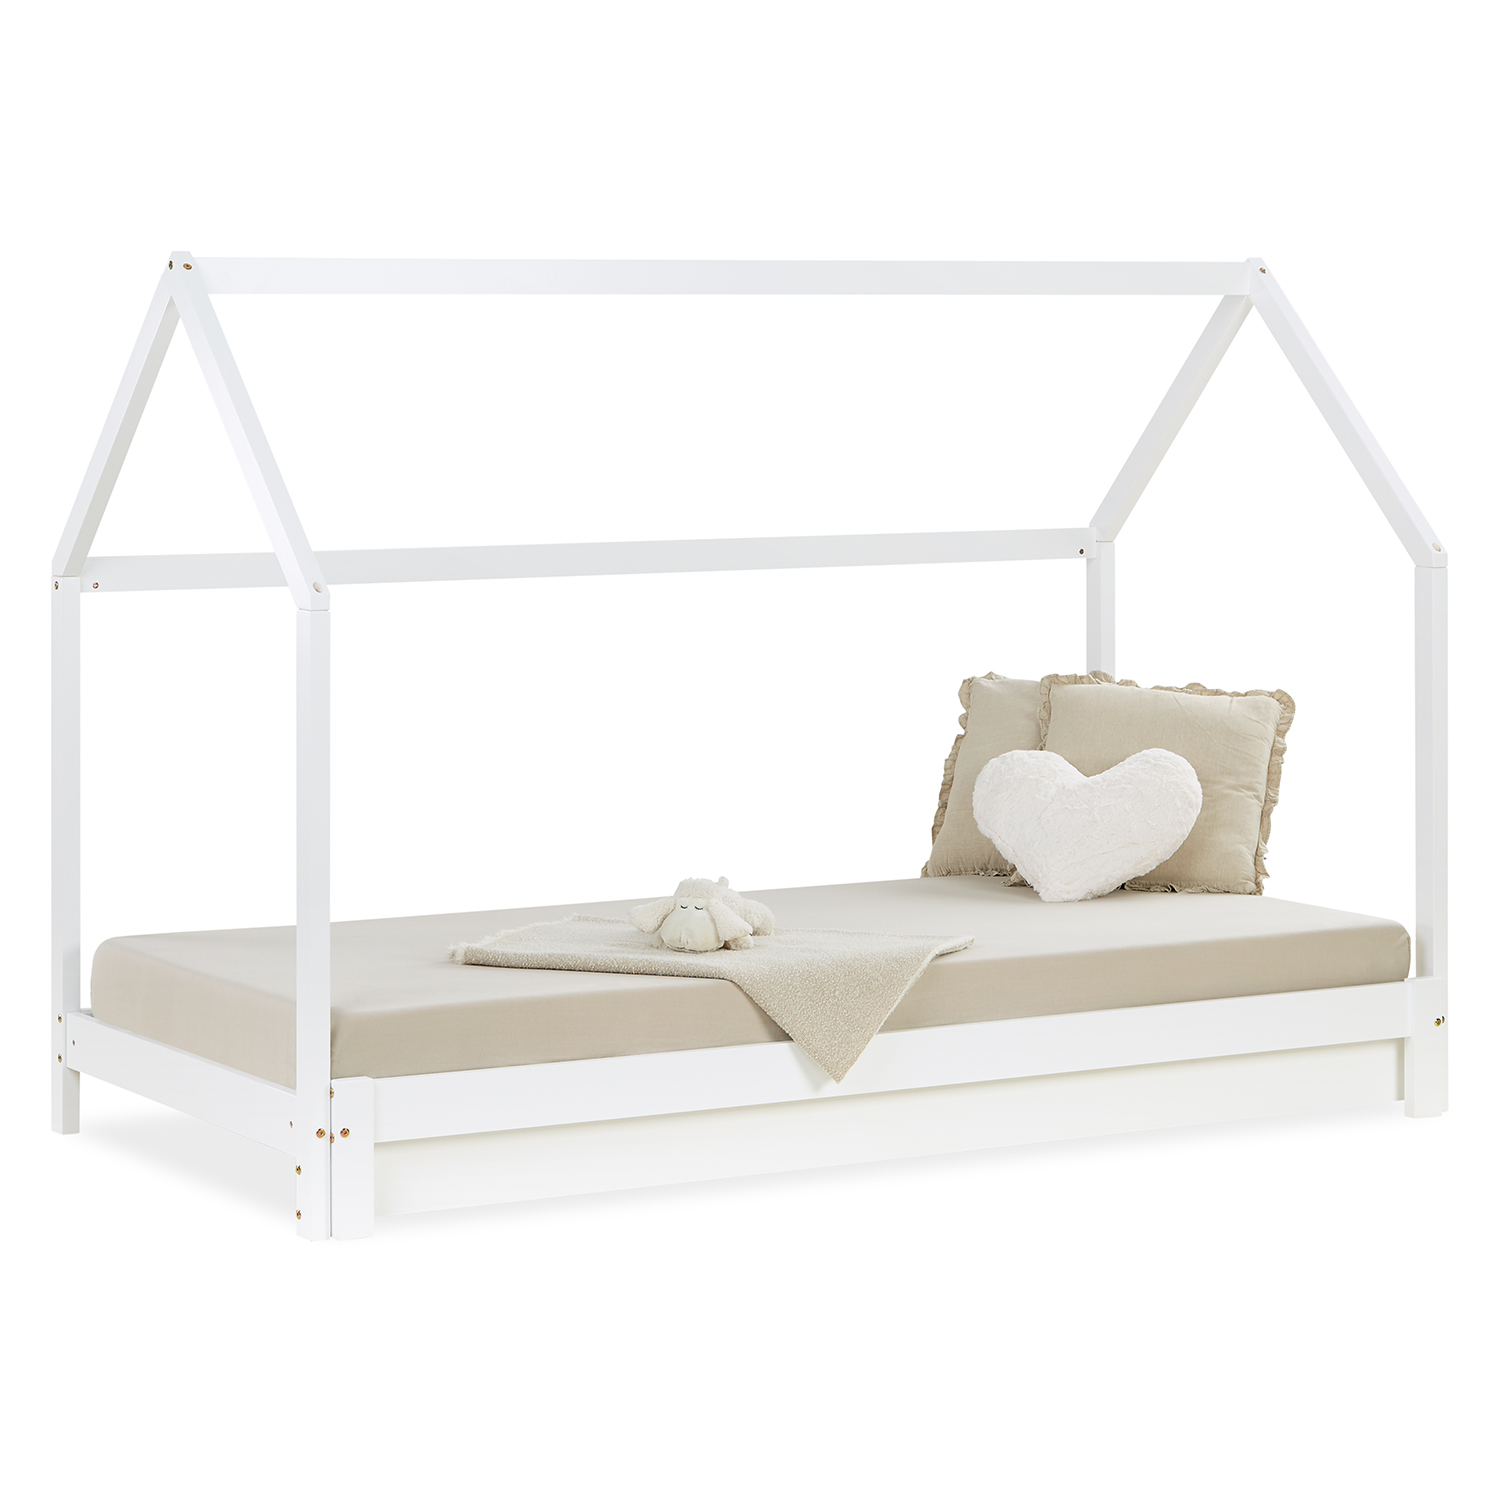 Children's Bed with Pull Out Bed 90x200 cm House Bed Treehouse Bed Children's Single Bed Wooden Frame White Trundle Bed Slats